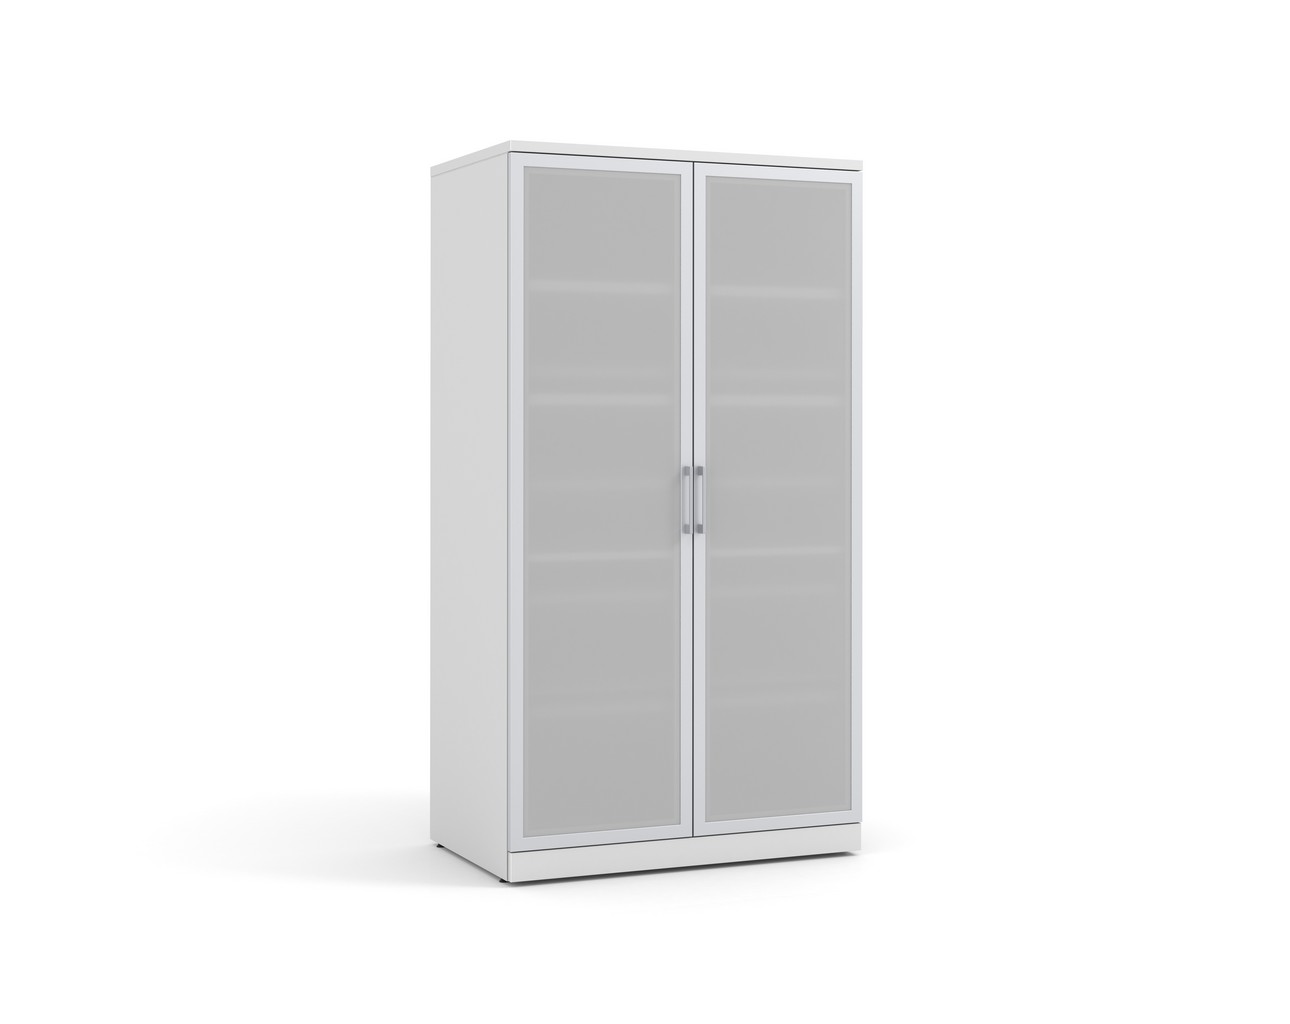 Glass Double Door Storage Cabinet 65 Inch with White Finish